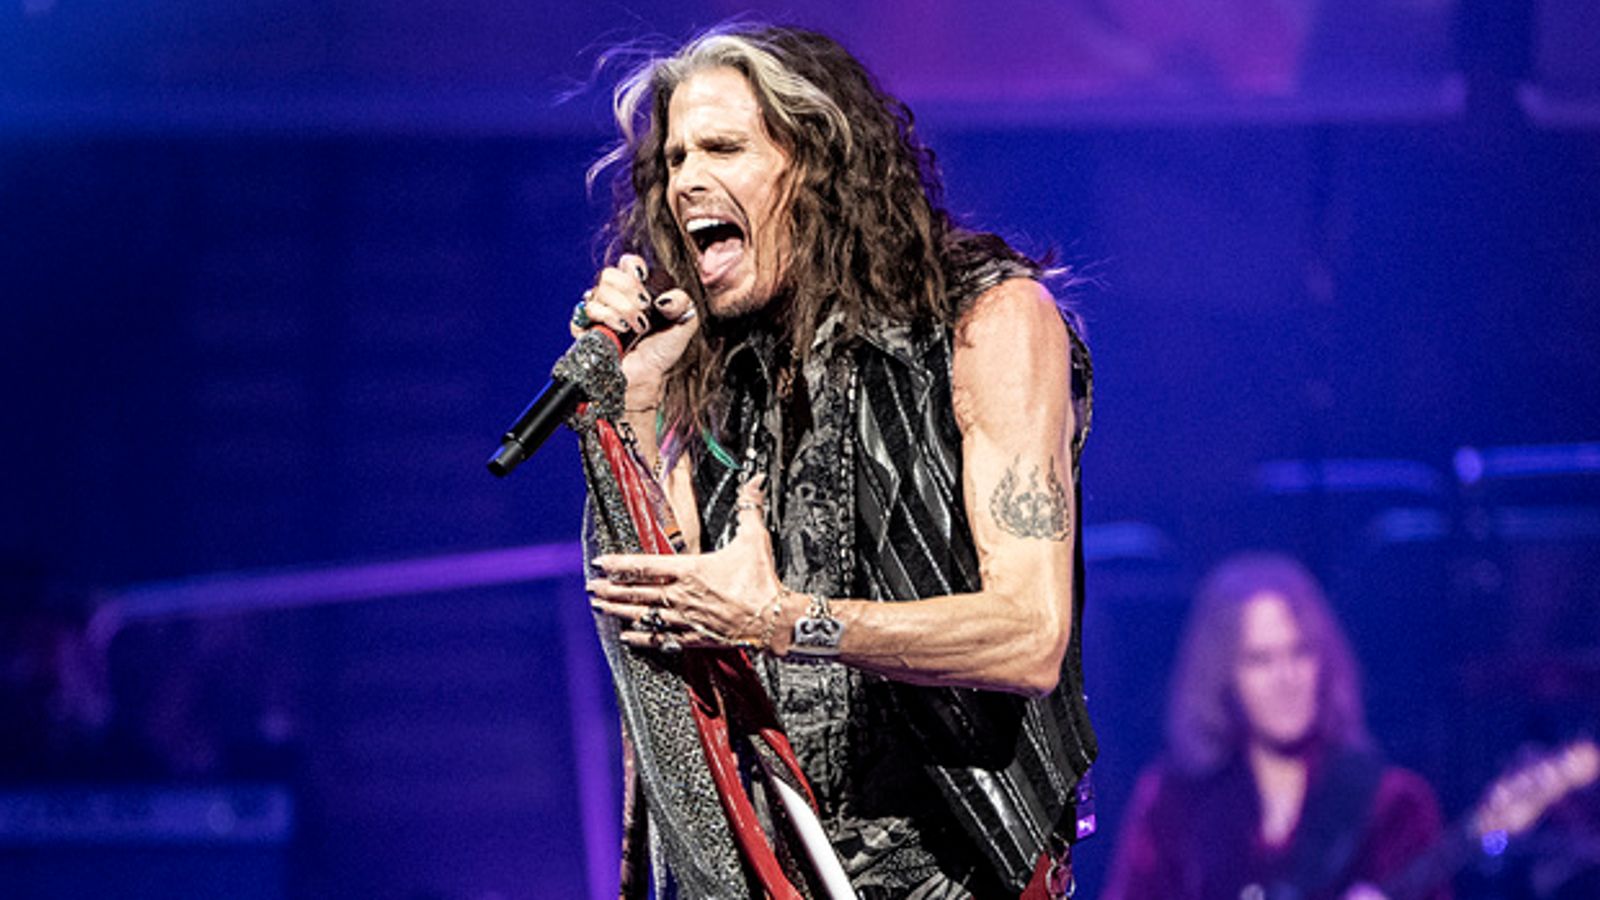 Aerosmith postpone farewell tour dates after frontman Steven Tyler injures vocal cords during New York gig